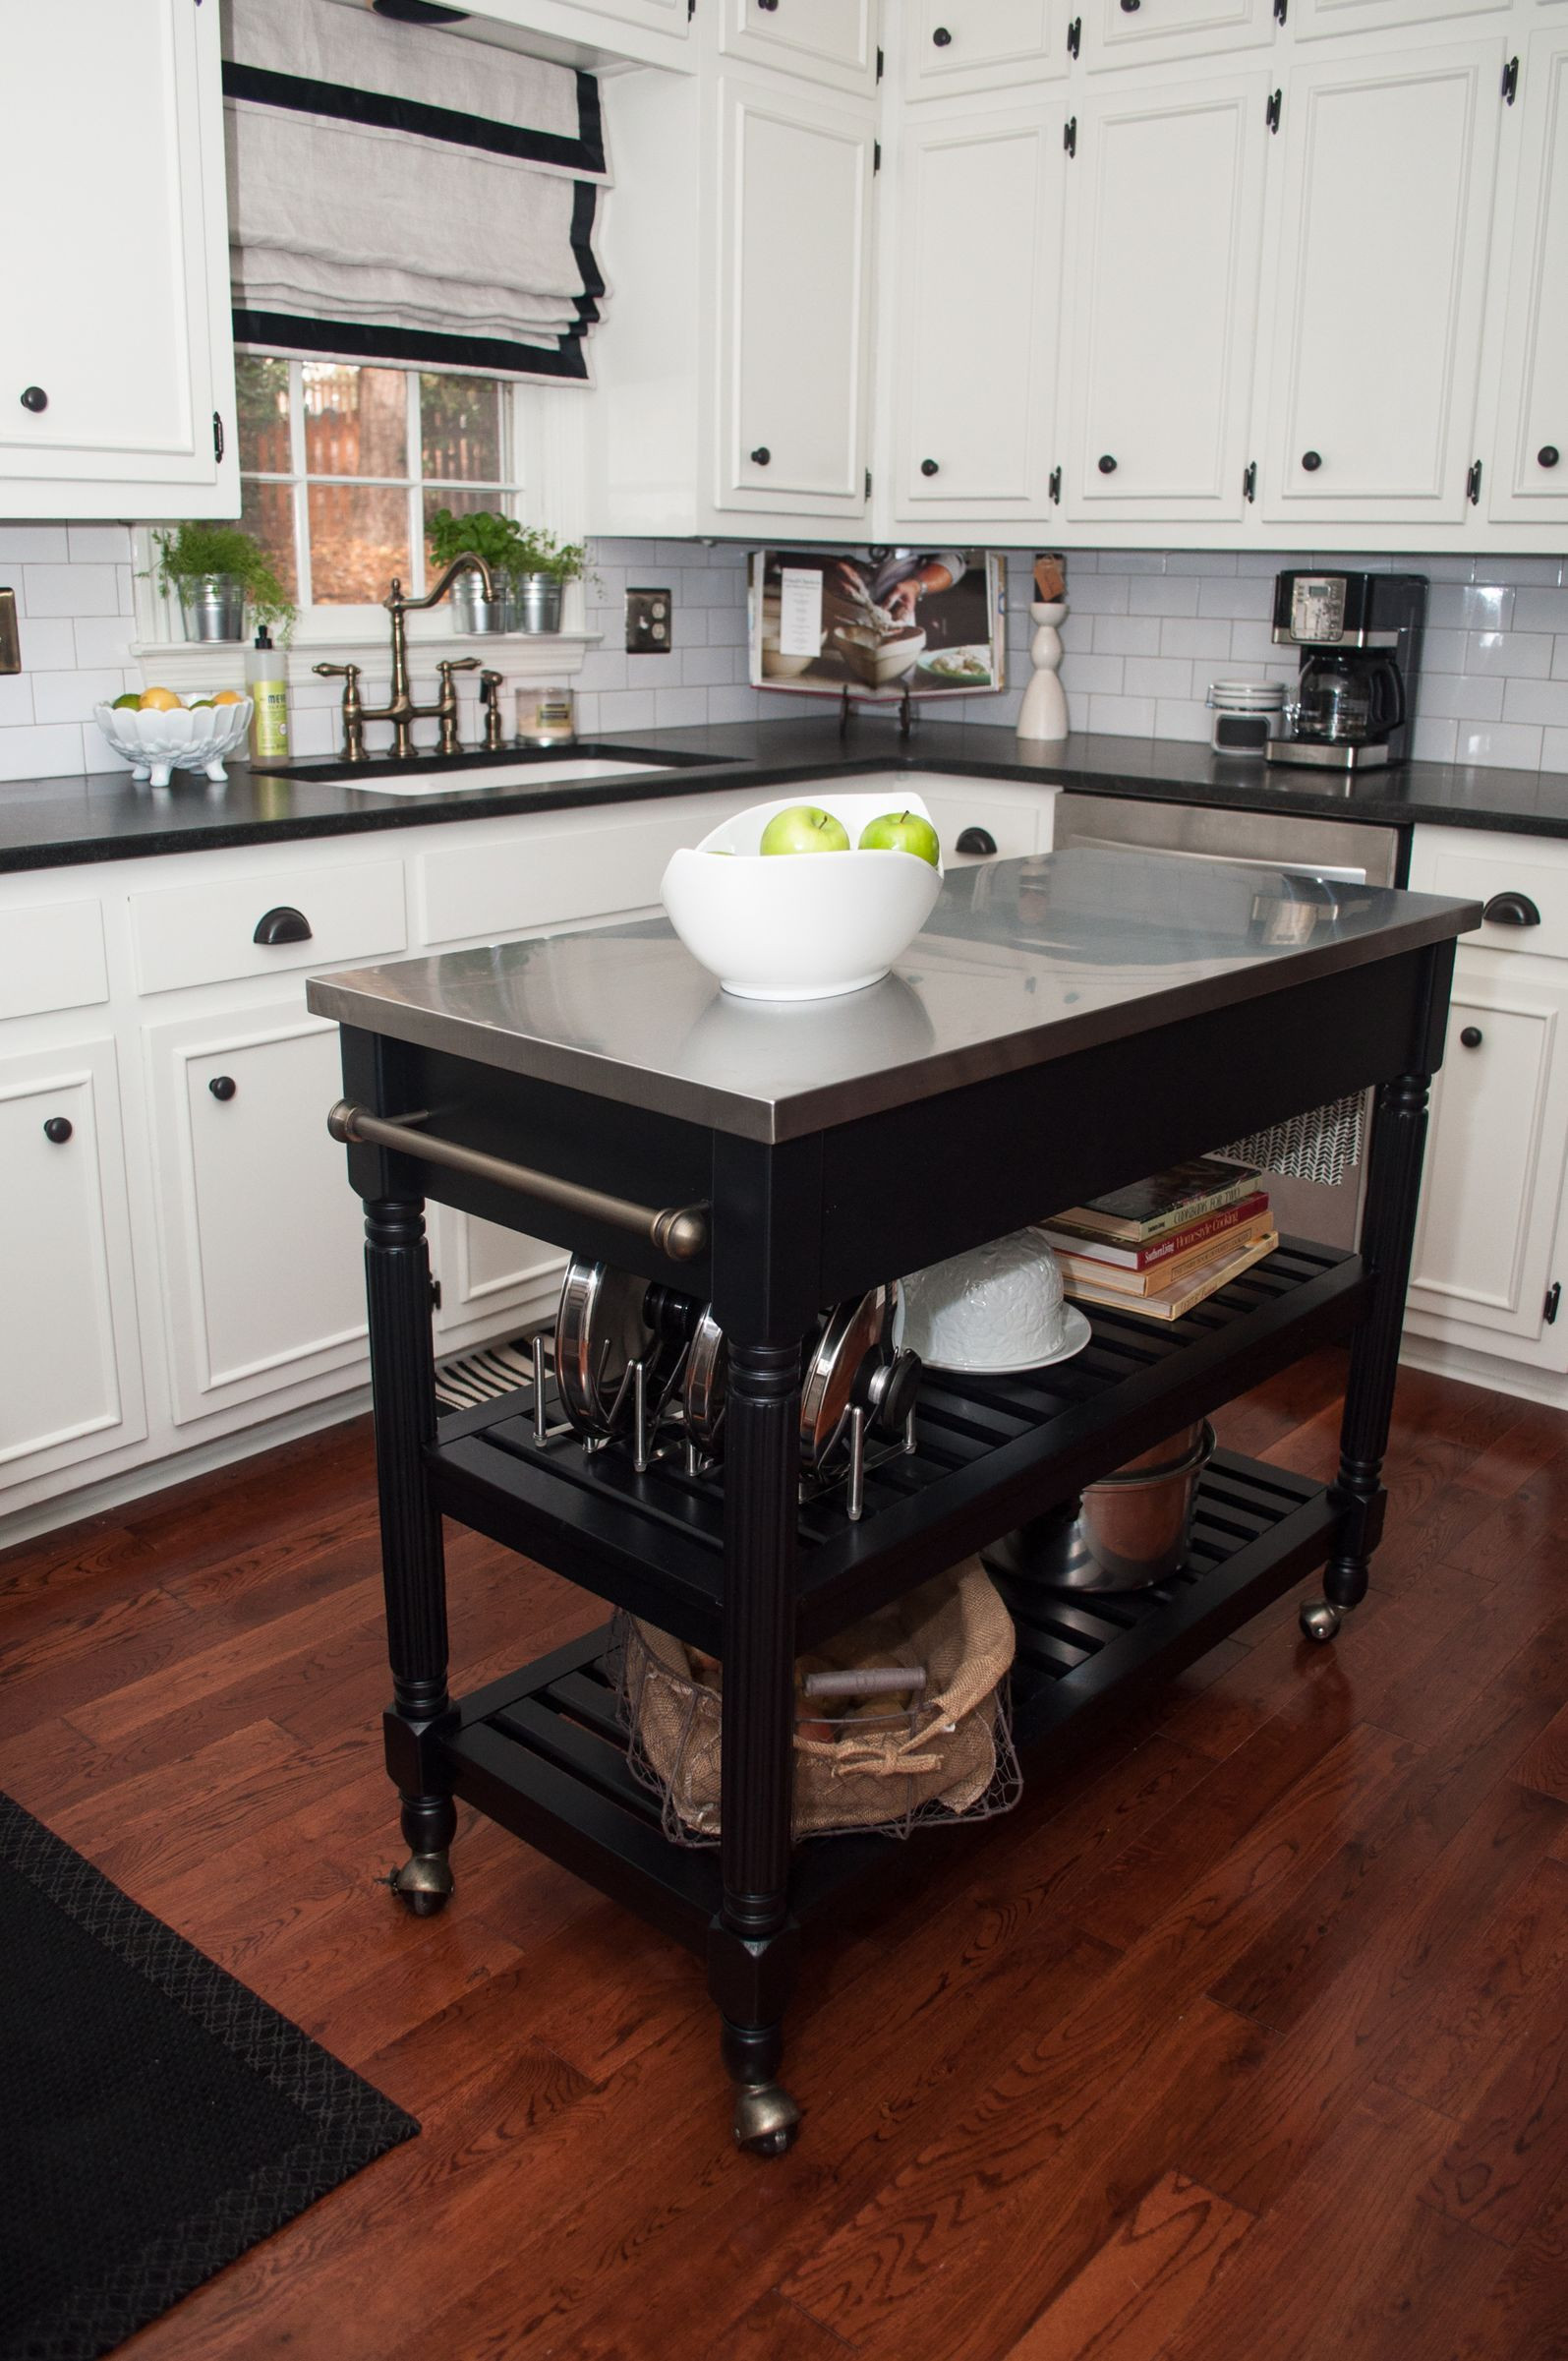 Rustic Kitchen Island On Wheels
 11 Types of Small Kitchen Islands & Carts on Wheels